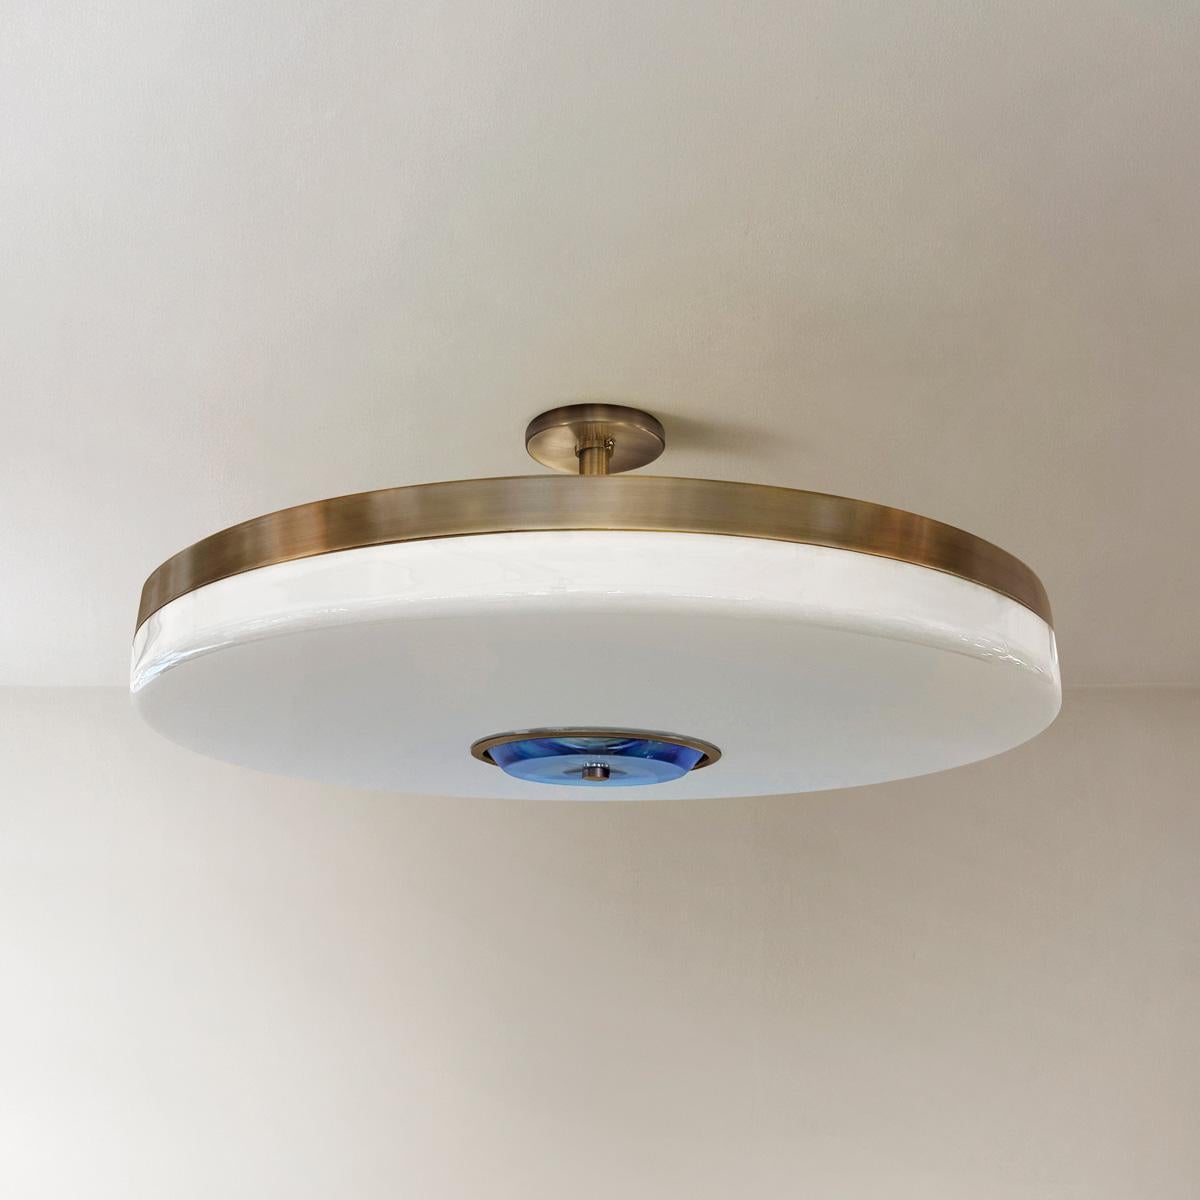 Iris Grande Ceiling Light by Gaspare Asaro-Polished Nickel Finish For Sale 1